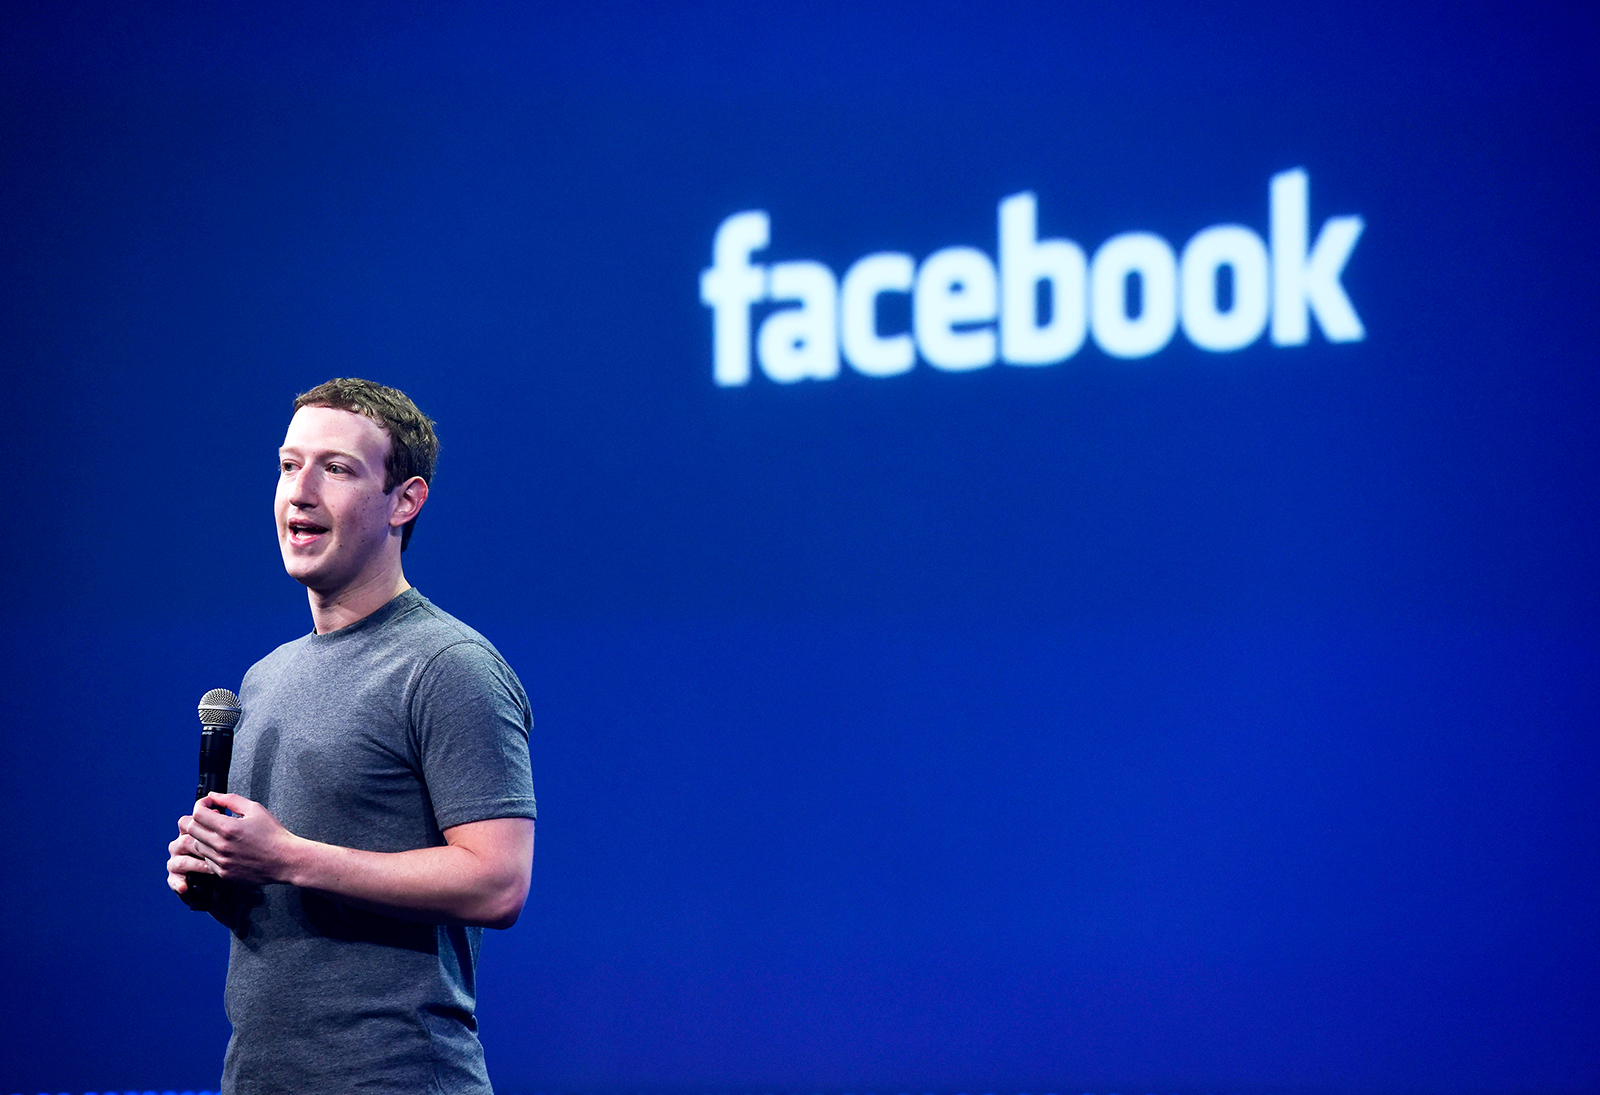 More than 170 million people in Africa now access Facebook each month